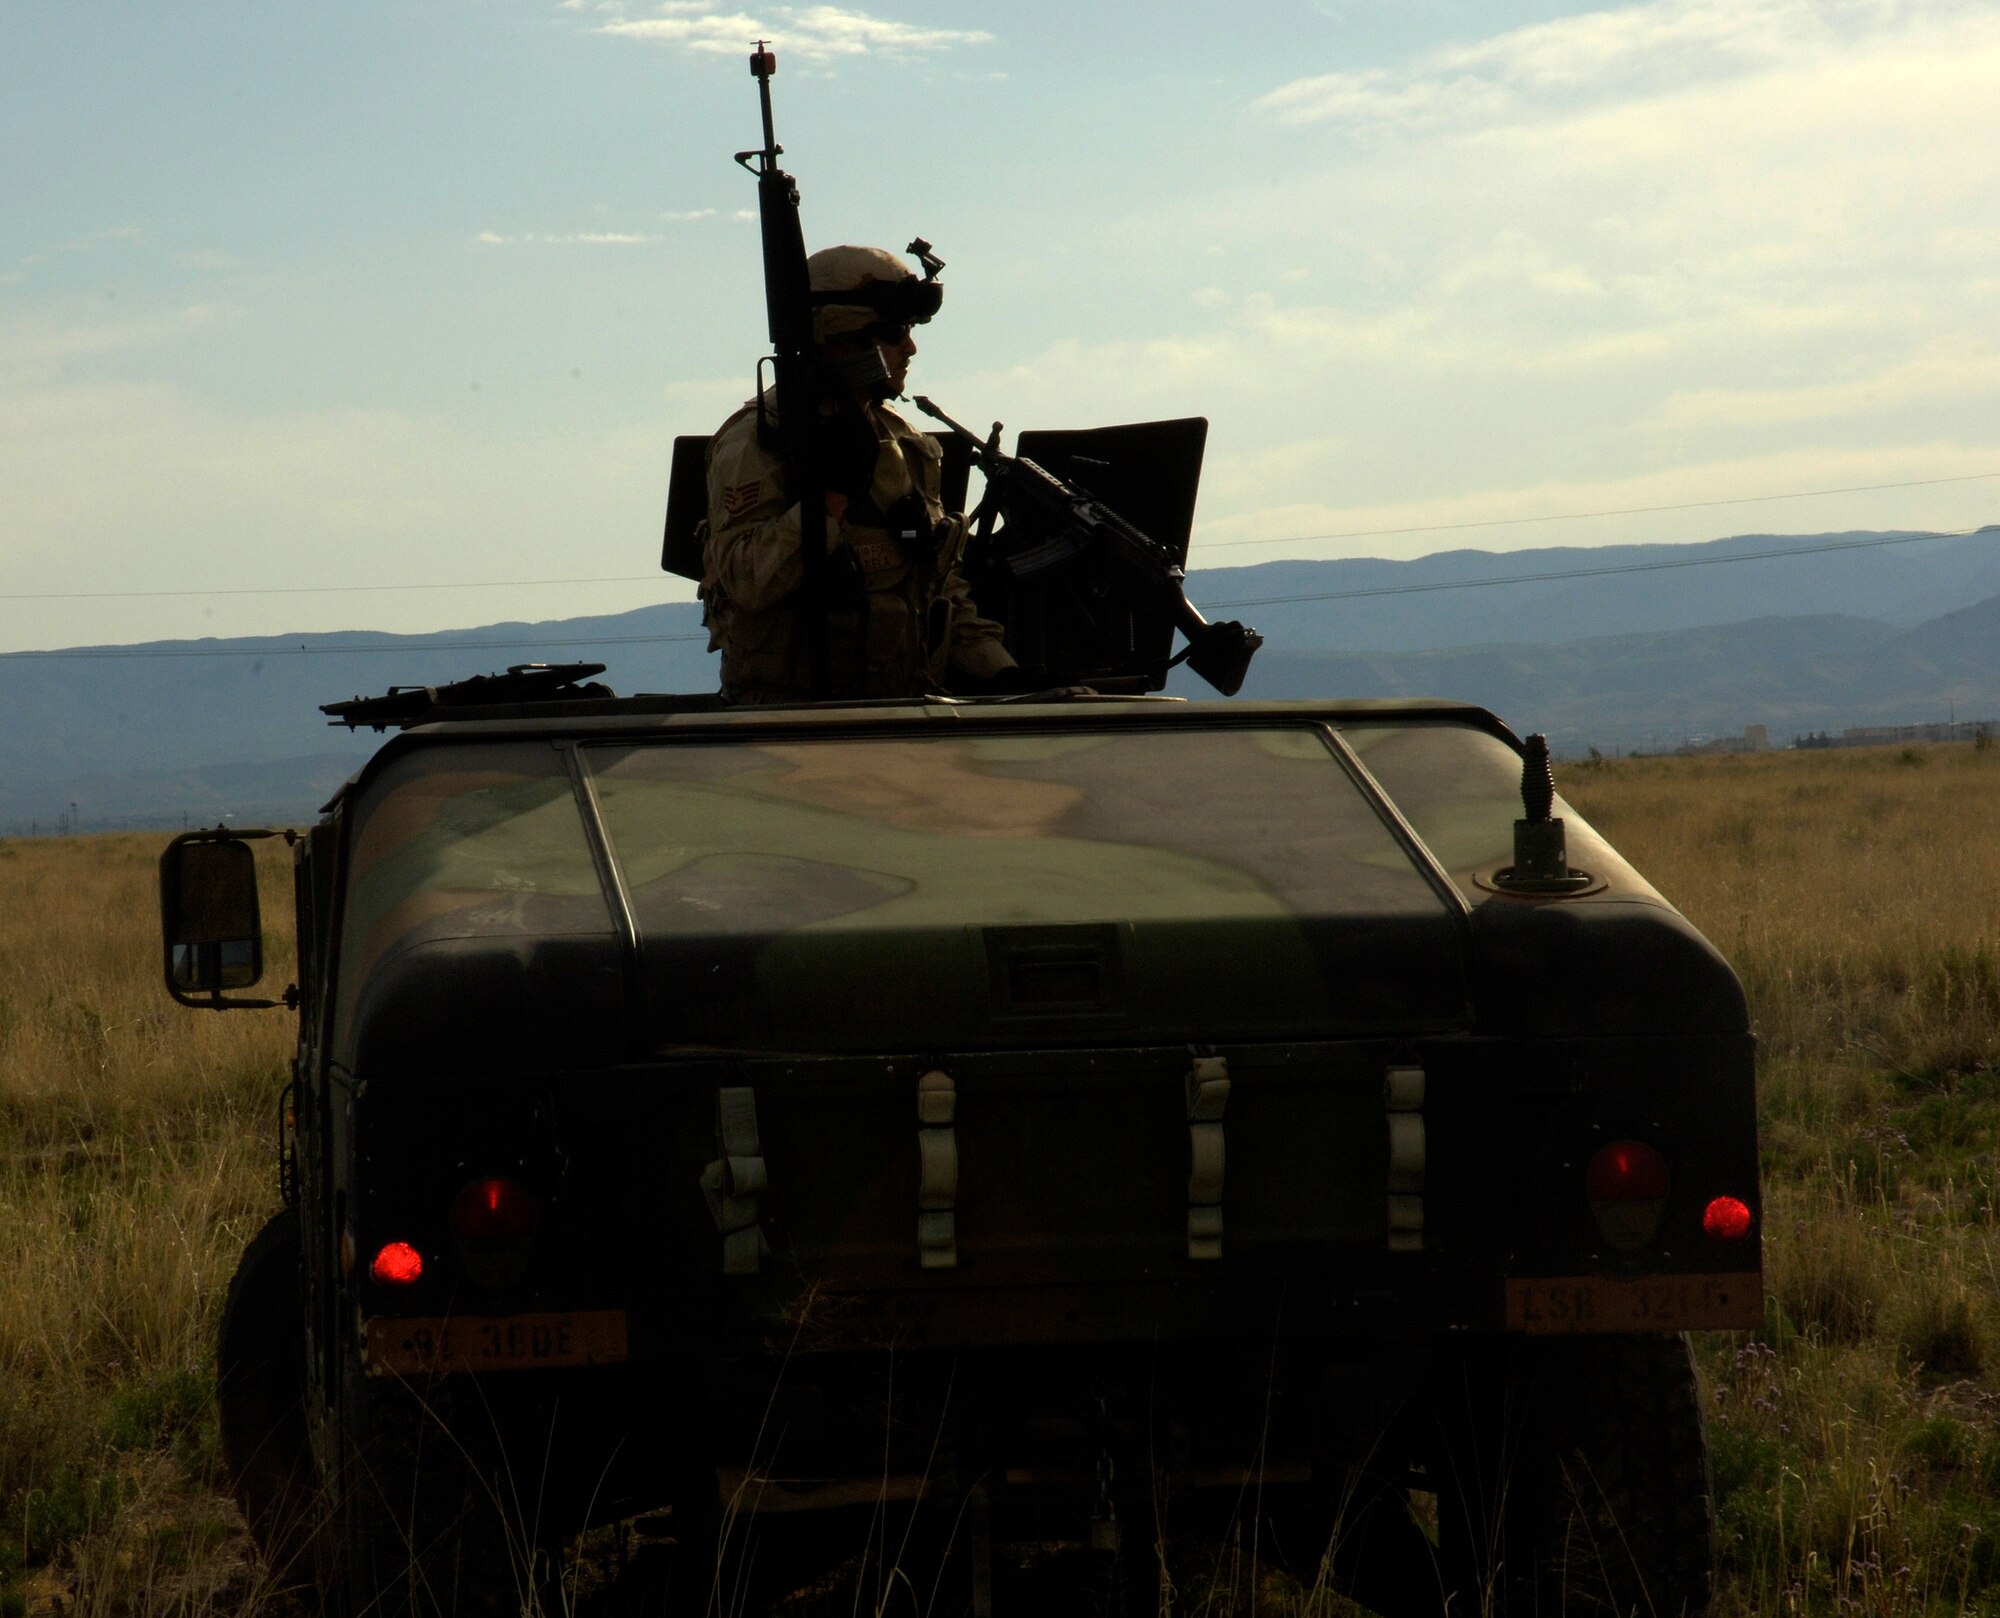 An Airman from the 49th Civil Engineer Squadron surveys out a humvee during a convoy for the Phase II exercise at Holloman. The 49 CES trained with Army for this convoy.  (U.S. Air Force photo by Airman 1st Class Michael Means)